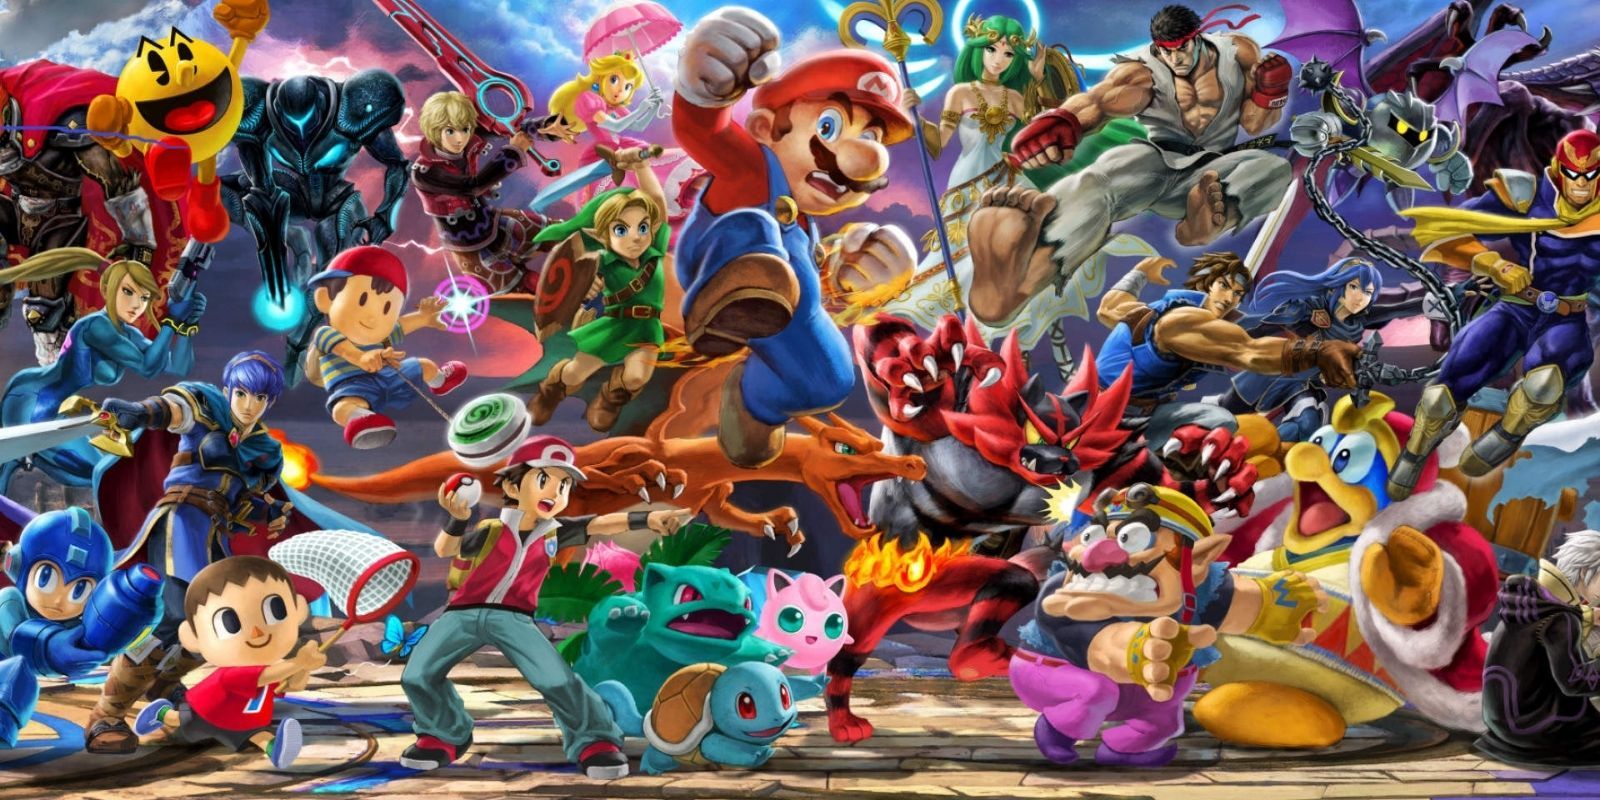 The gigantic roster of characters in Super Smash Bros Ultimate